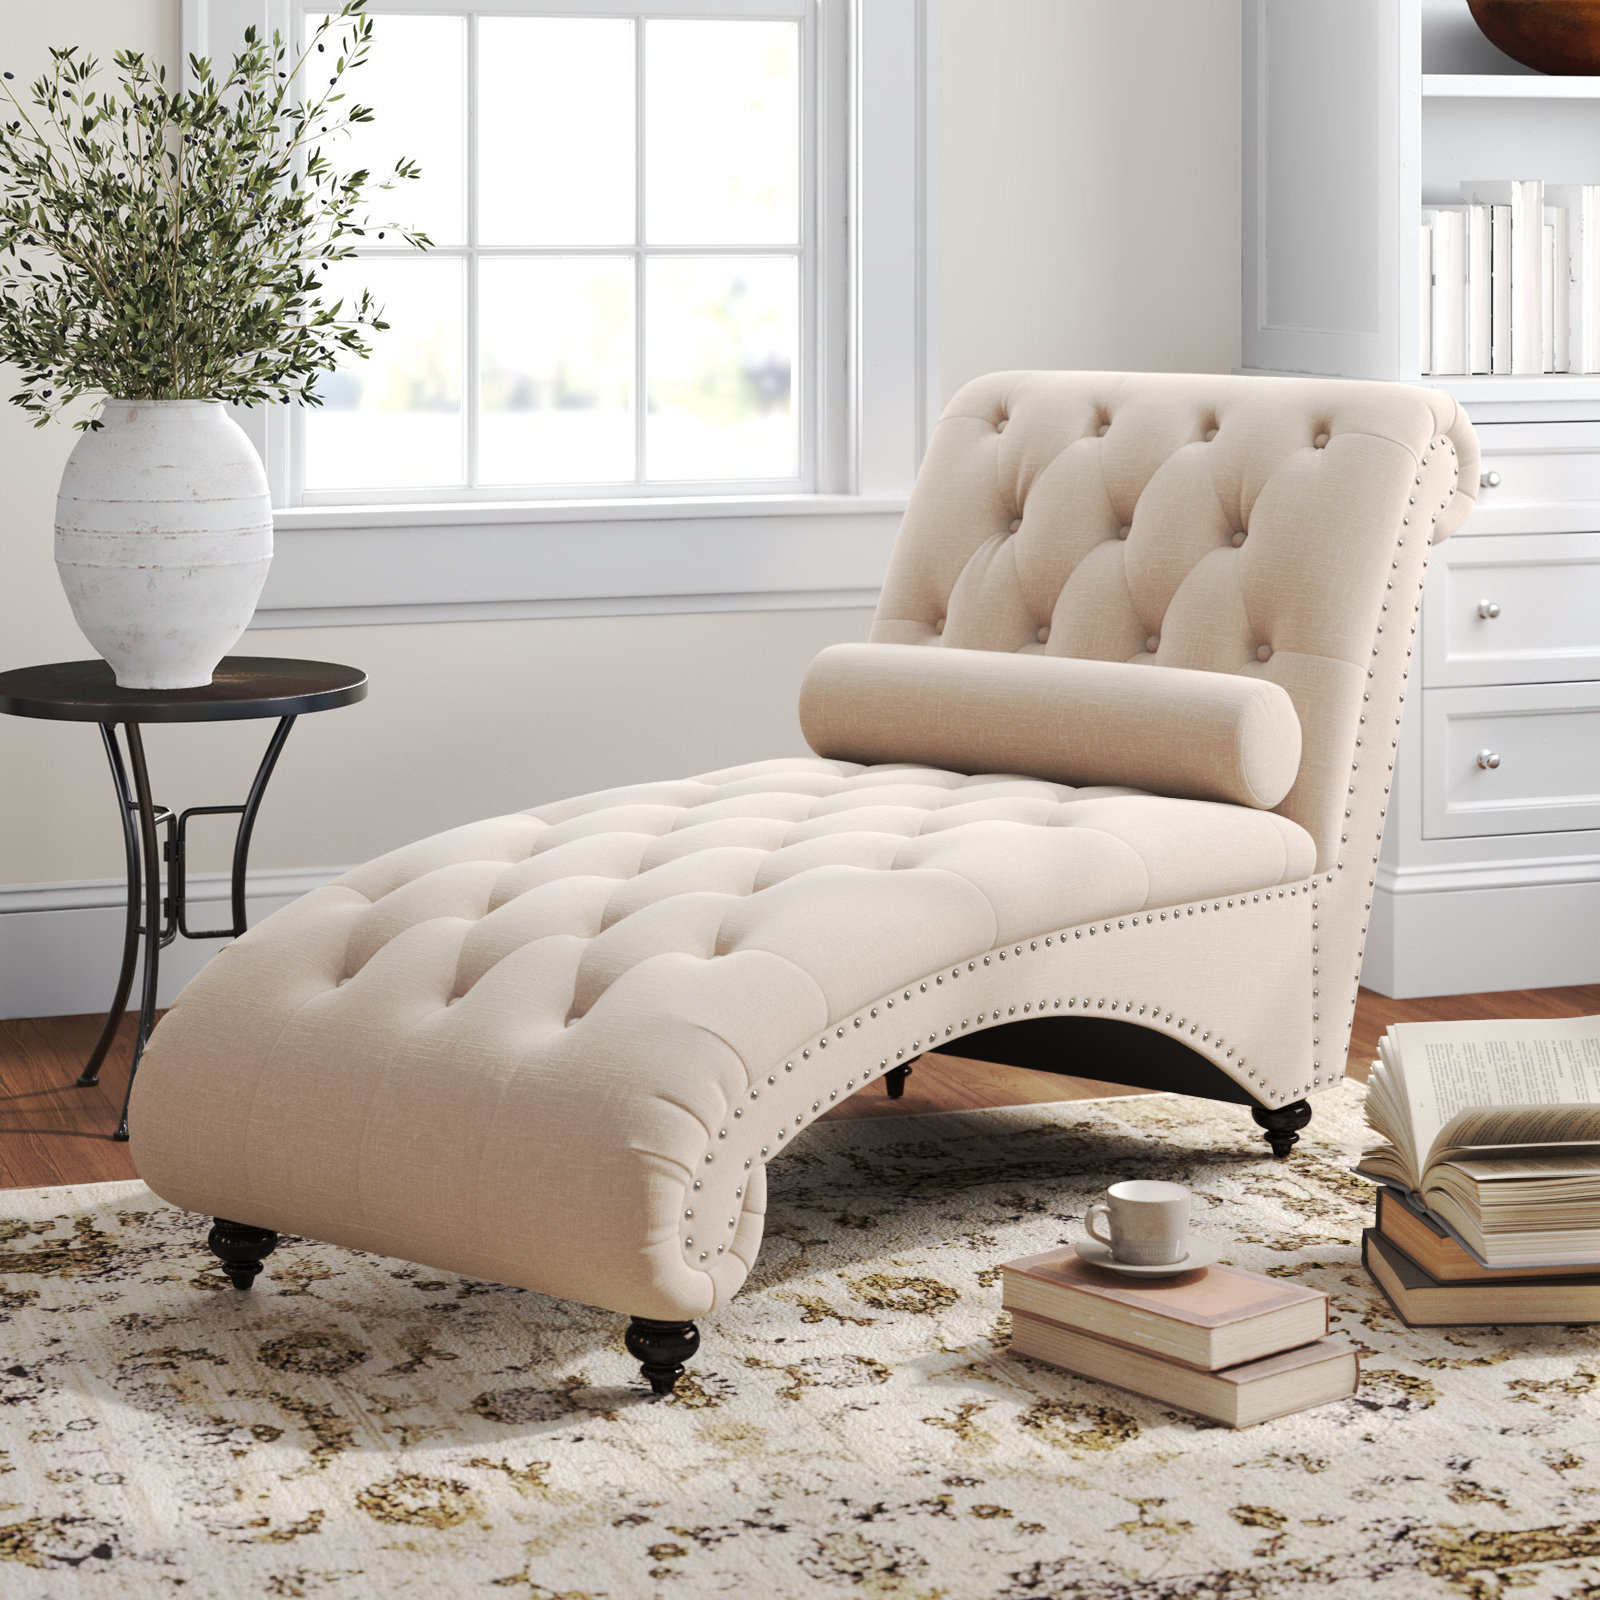 Fenton Upholstered Chaise Lounge